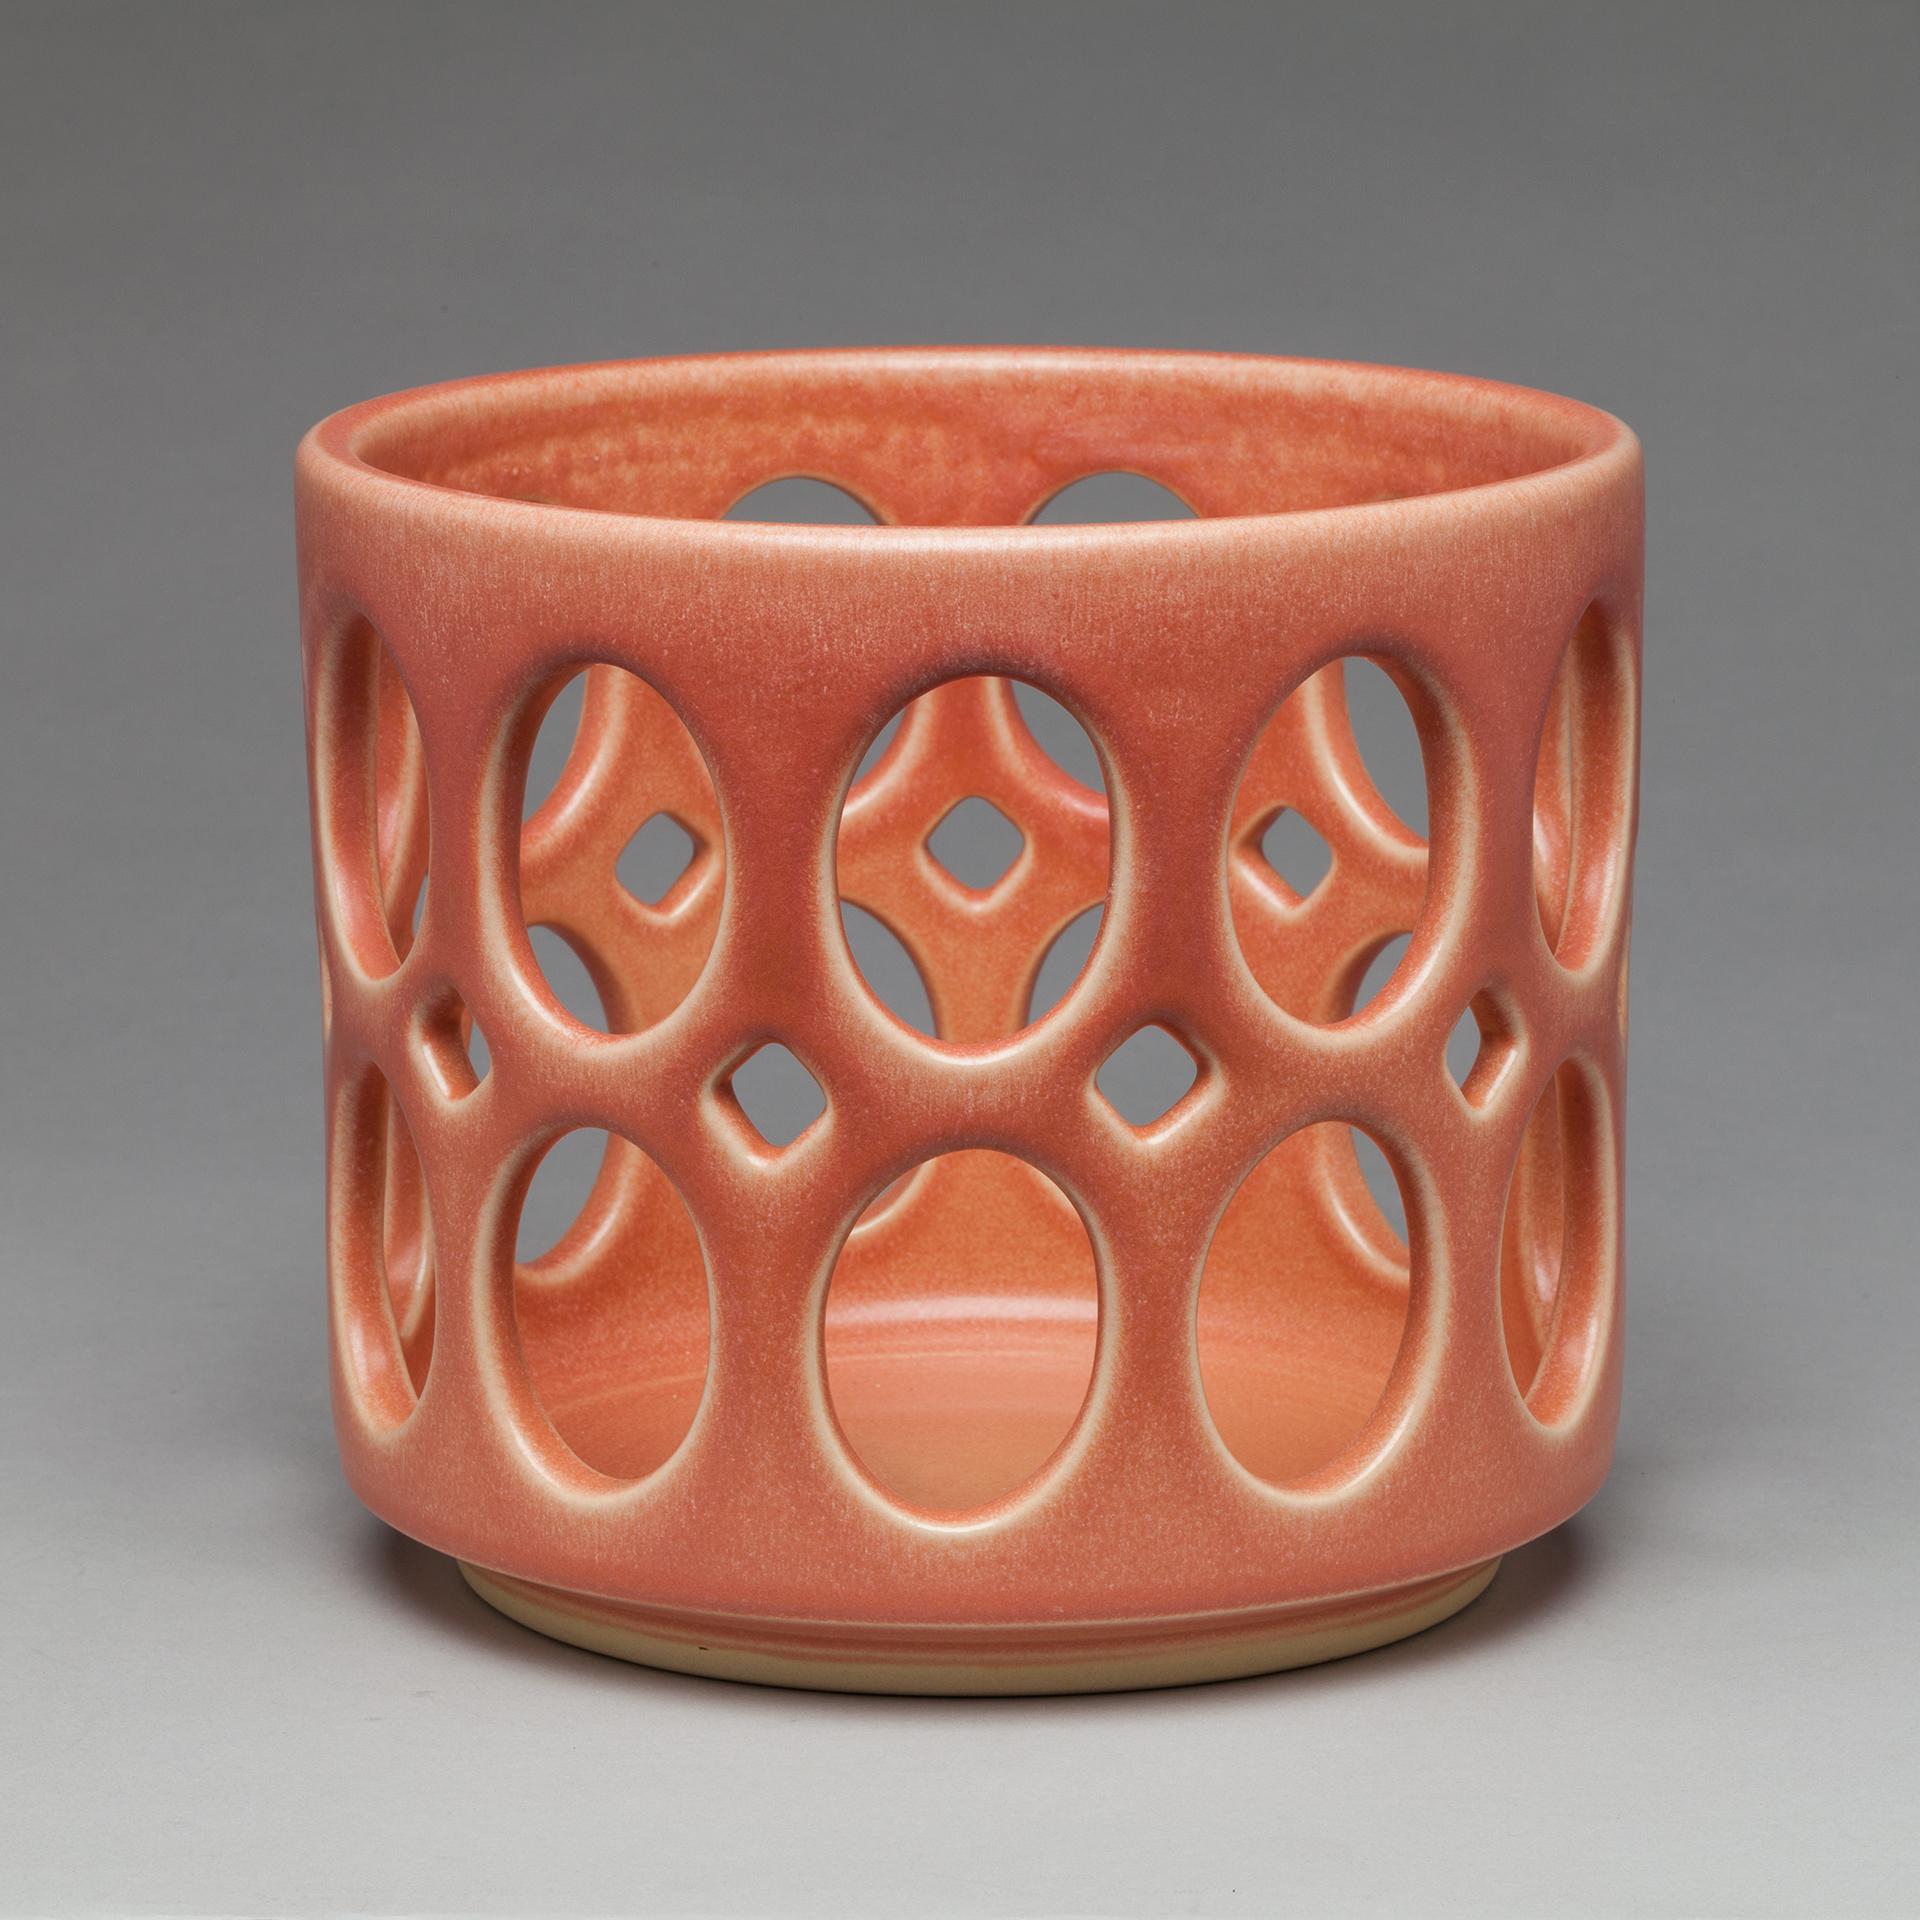 Inspired by Mid-Century Modern design, this bowl is wheel thrown and hand pierced stoneware with a deep pink satin glaze. Small holes are created when the clay is still wet and then each hole is painstakingly enlarged and smoothed when the clay is